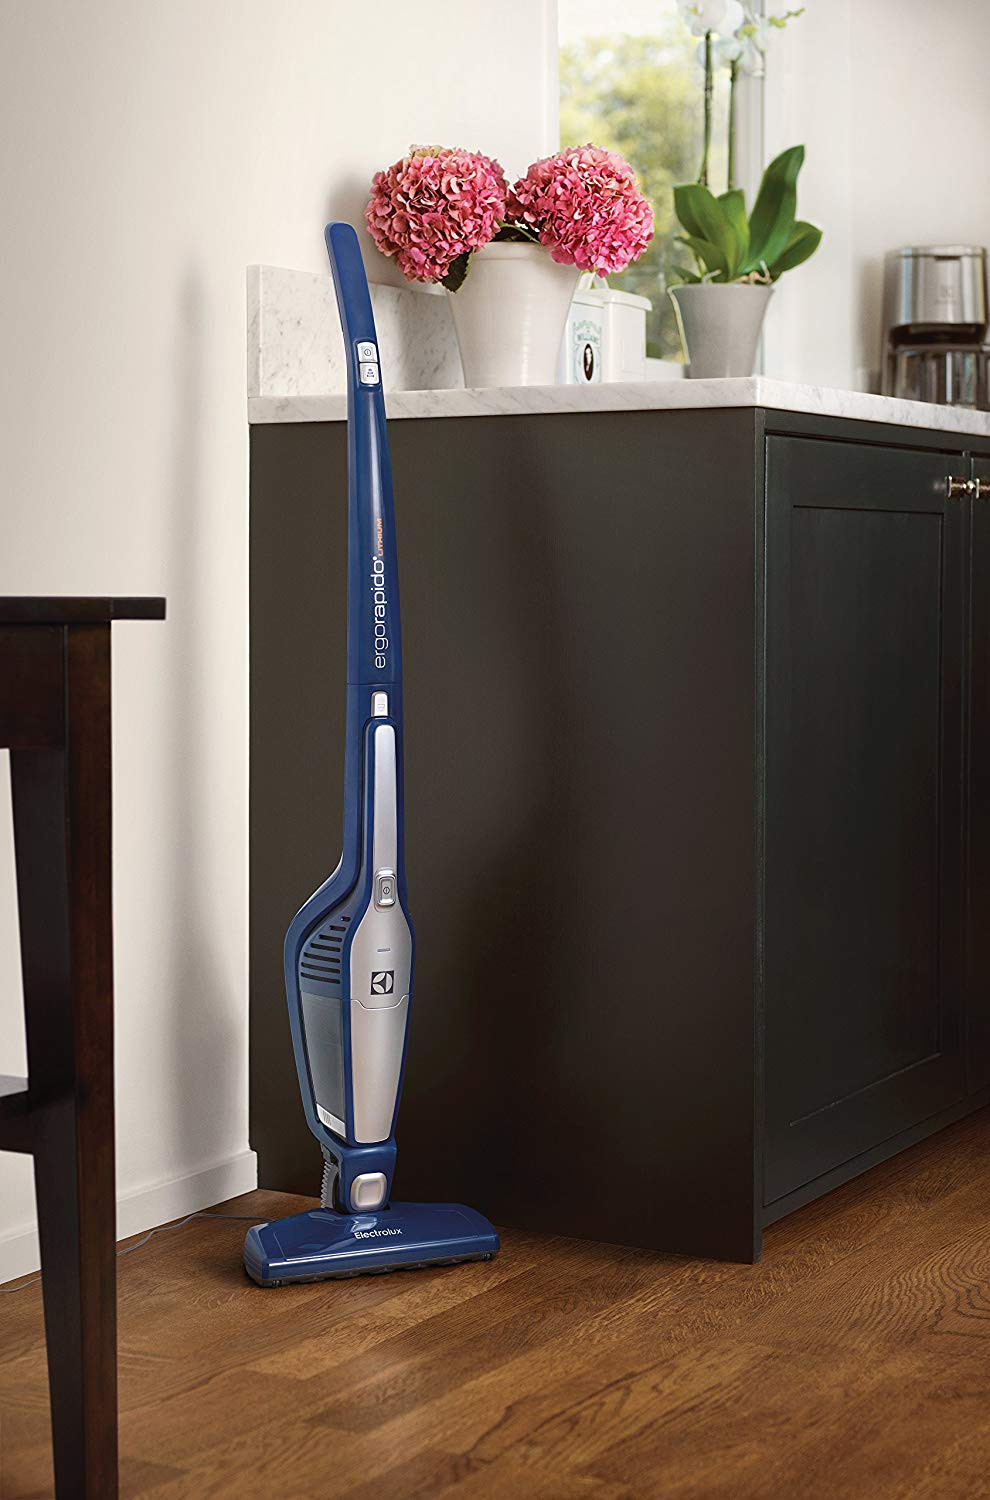 15 Best Best Cordless Vacuum for Pet Hair On Hardwood Floors 2024 free download best cordless vacuum for pet hair on hardwood floors of amazon com electrolux ergorapido lithium ion 2 1 stick and handheld throughout amazon com electrolux ergorapido lithium ion 2 1 stick 